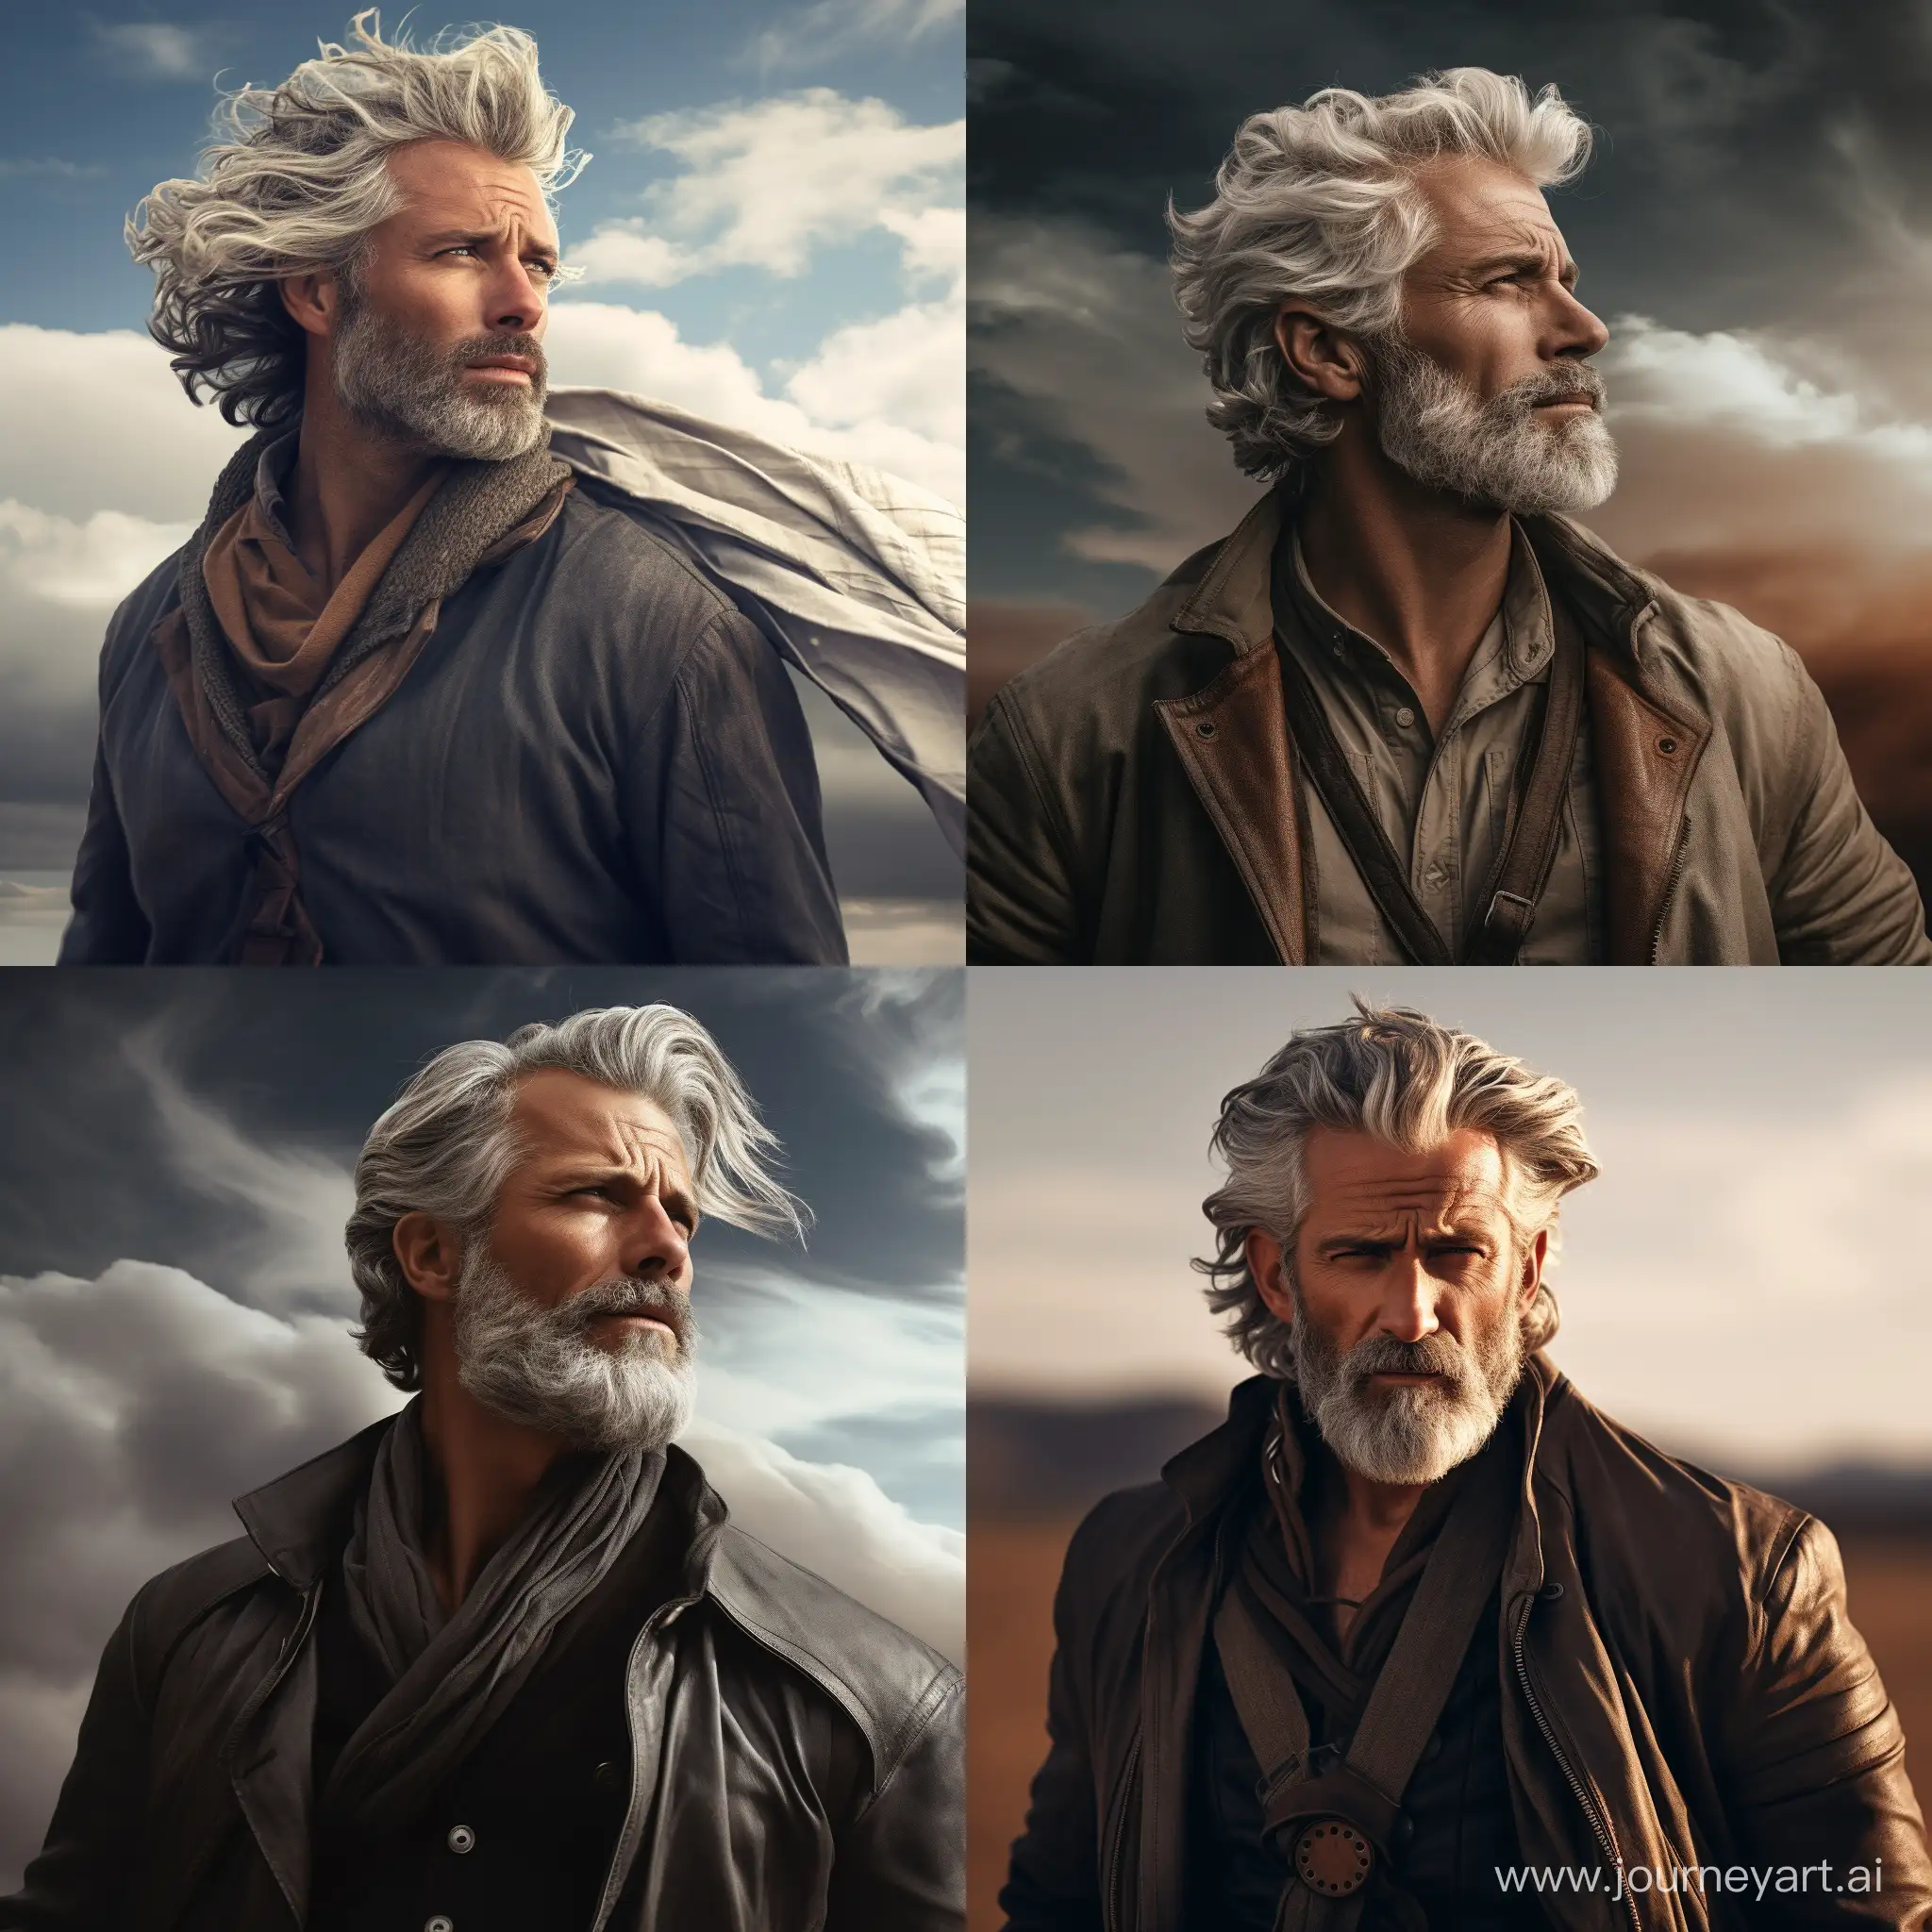 Majestic-GrayHaired-Man-Embracing-the-Wind-in-a-11-Aspect-Ratio